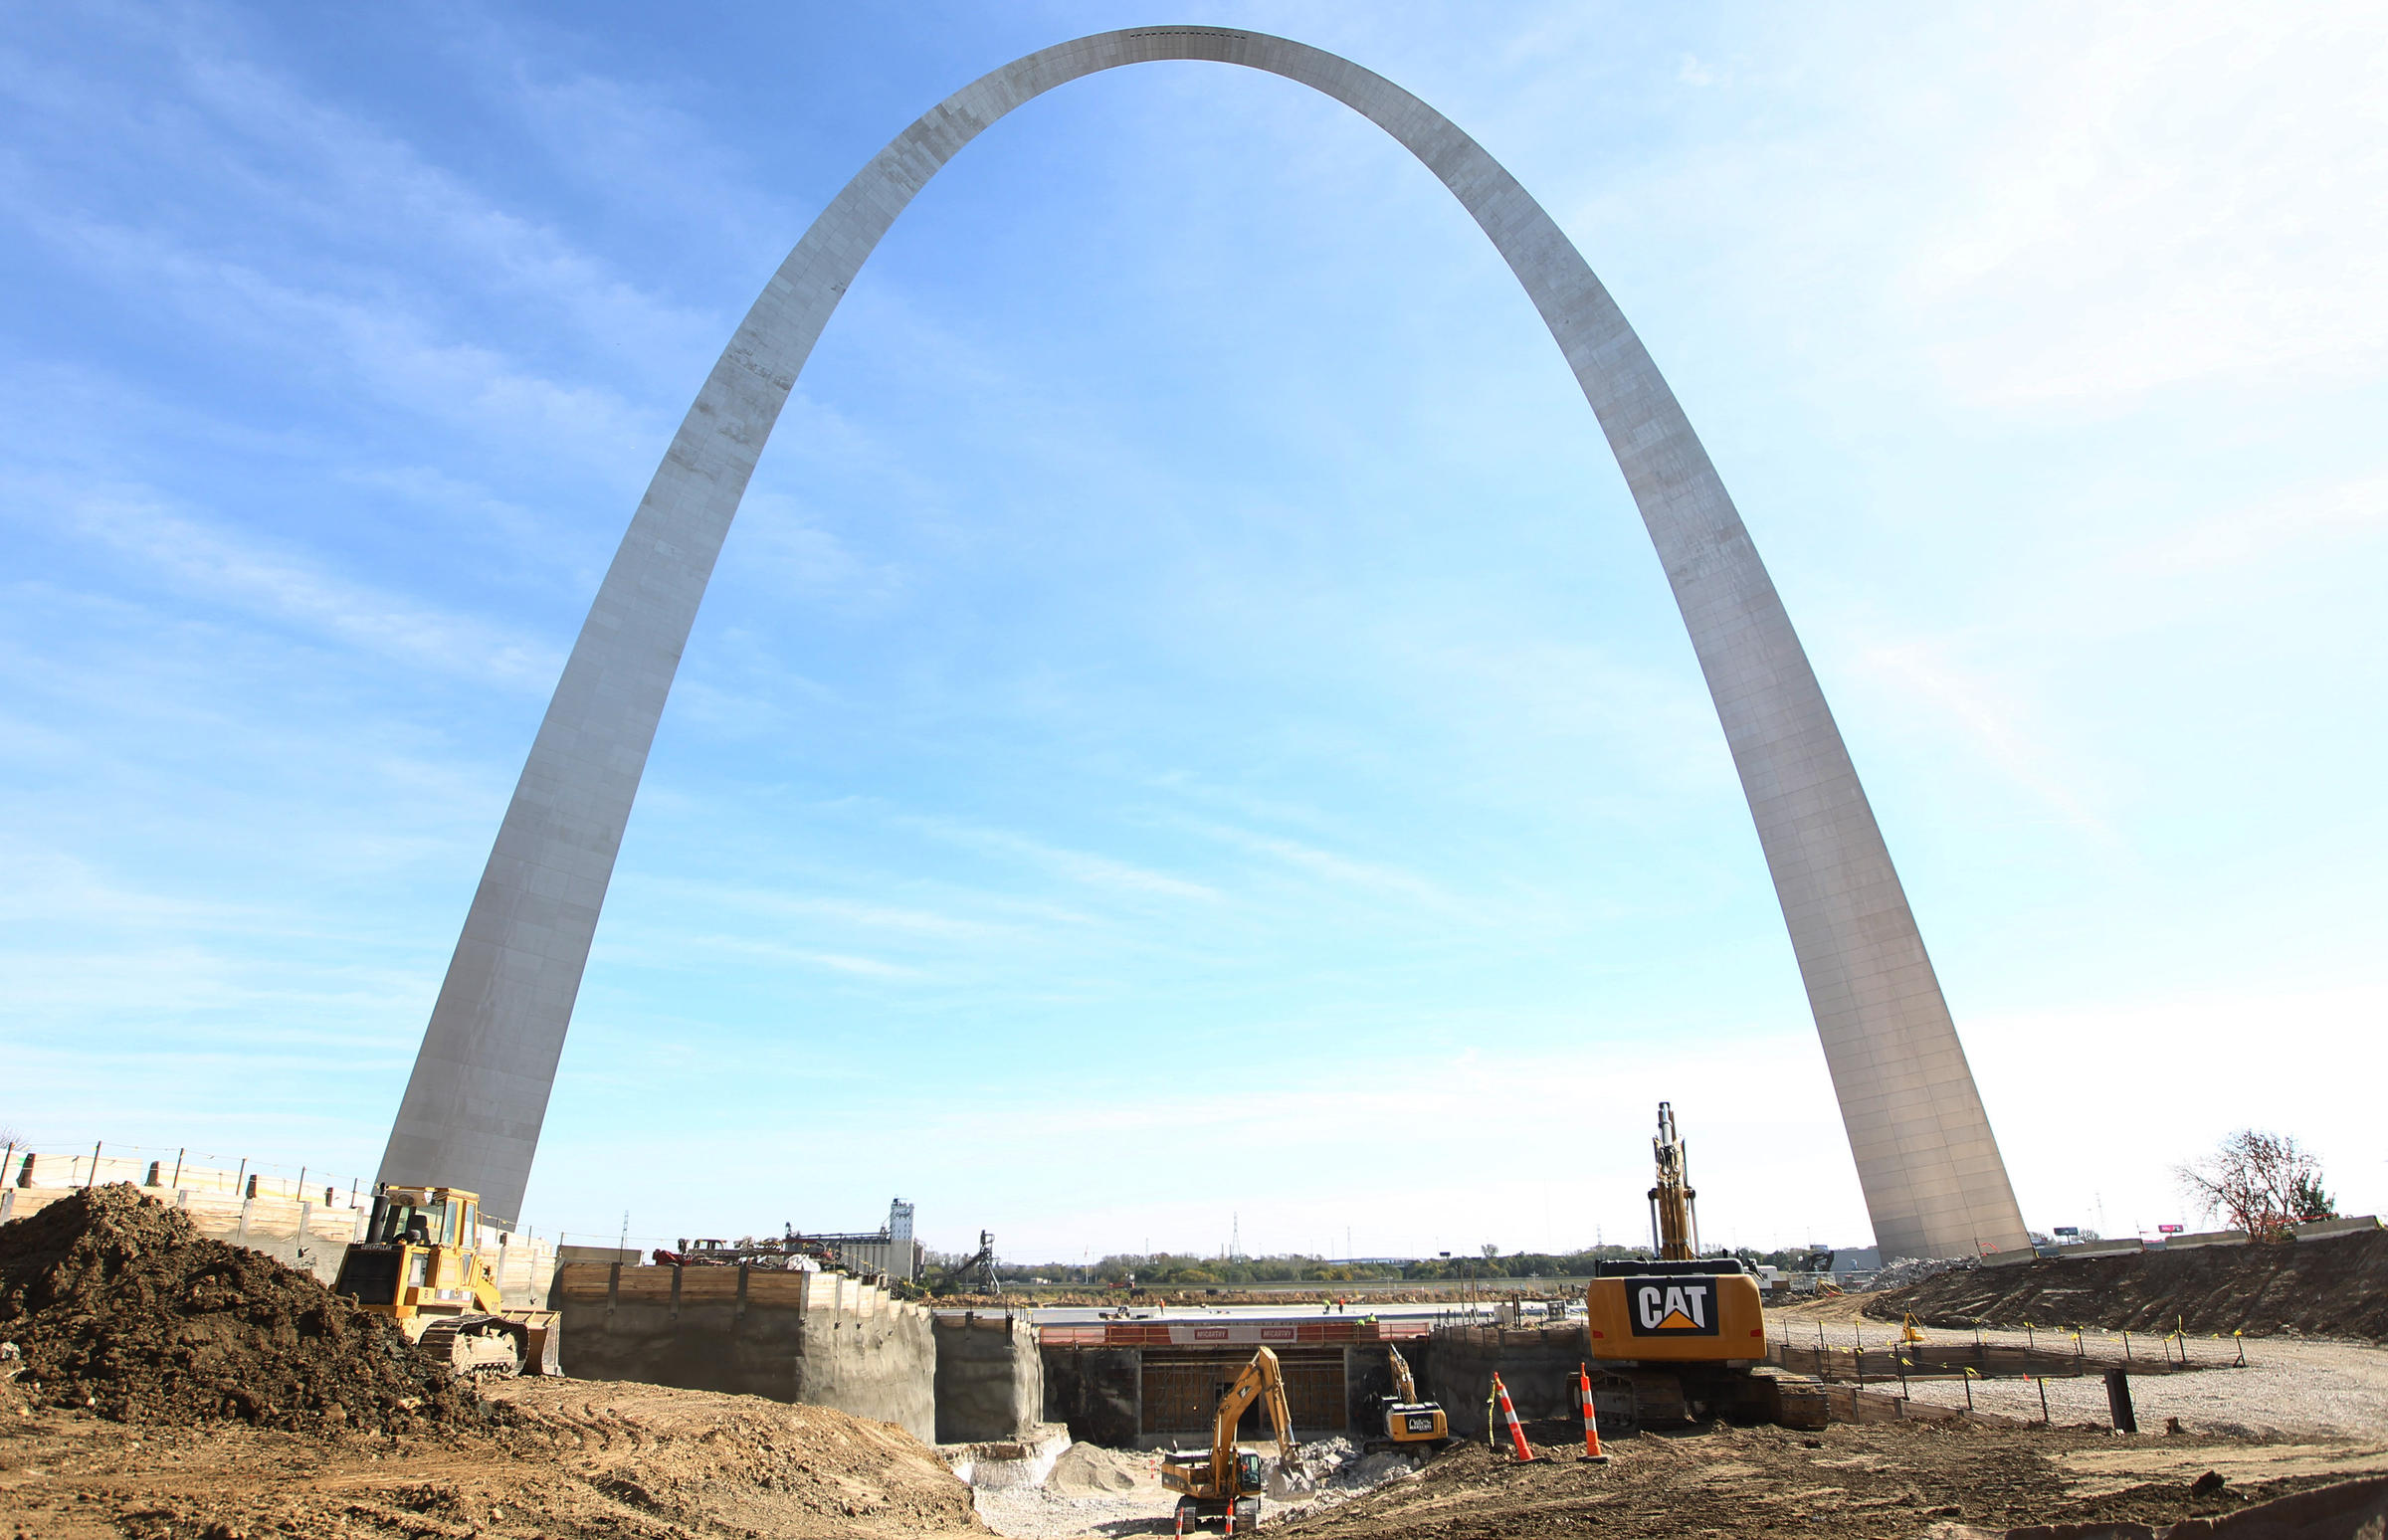 As Gateway Arch Turns 50, Its Message Gets Reframed | WVXU